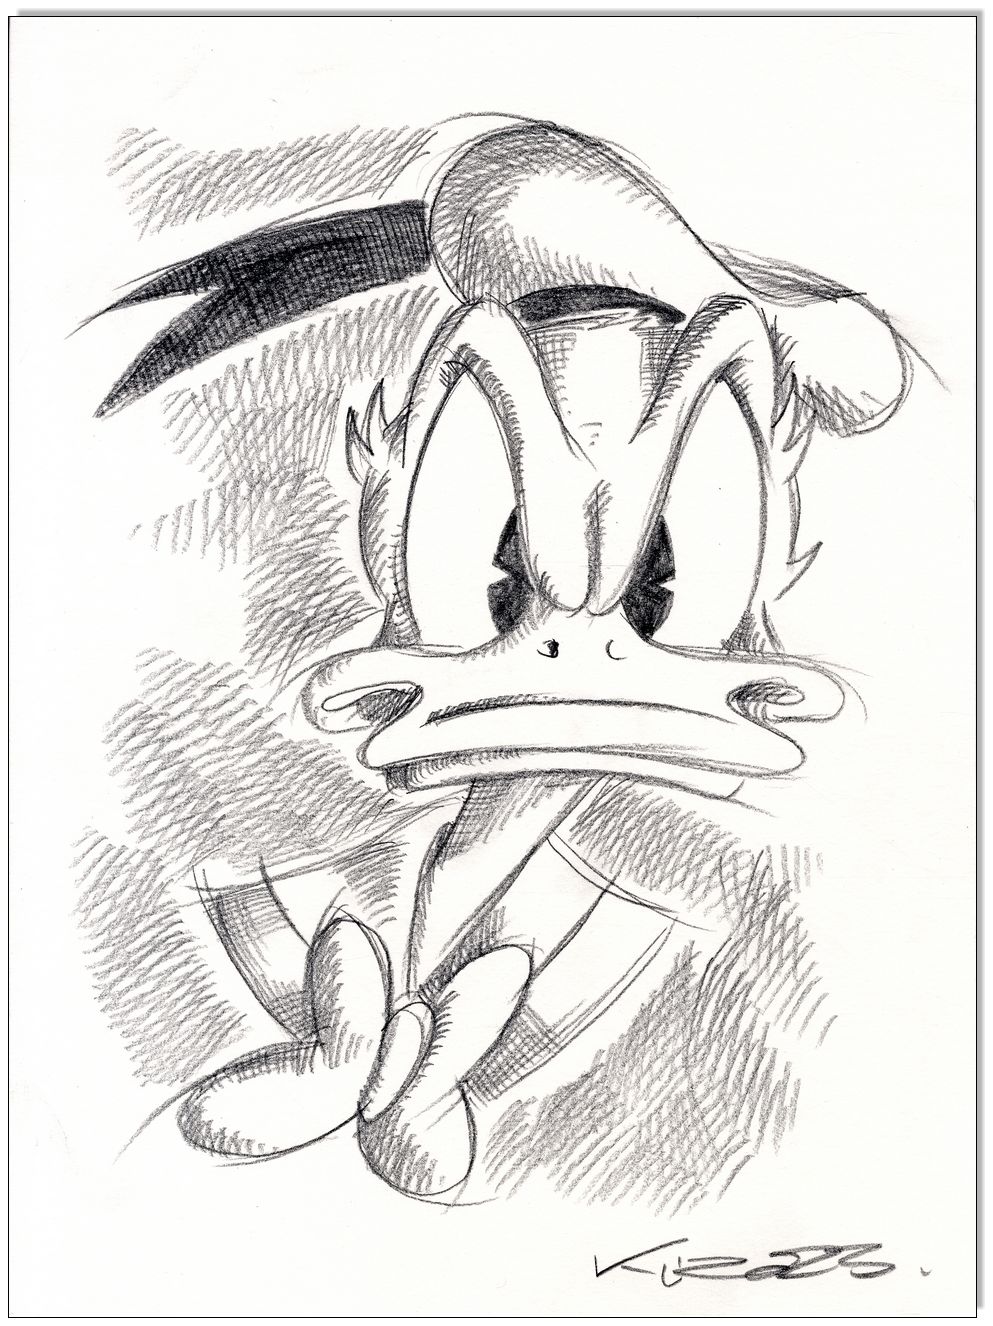 Donald Duck Angry Donald - 24 x 32 cm